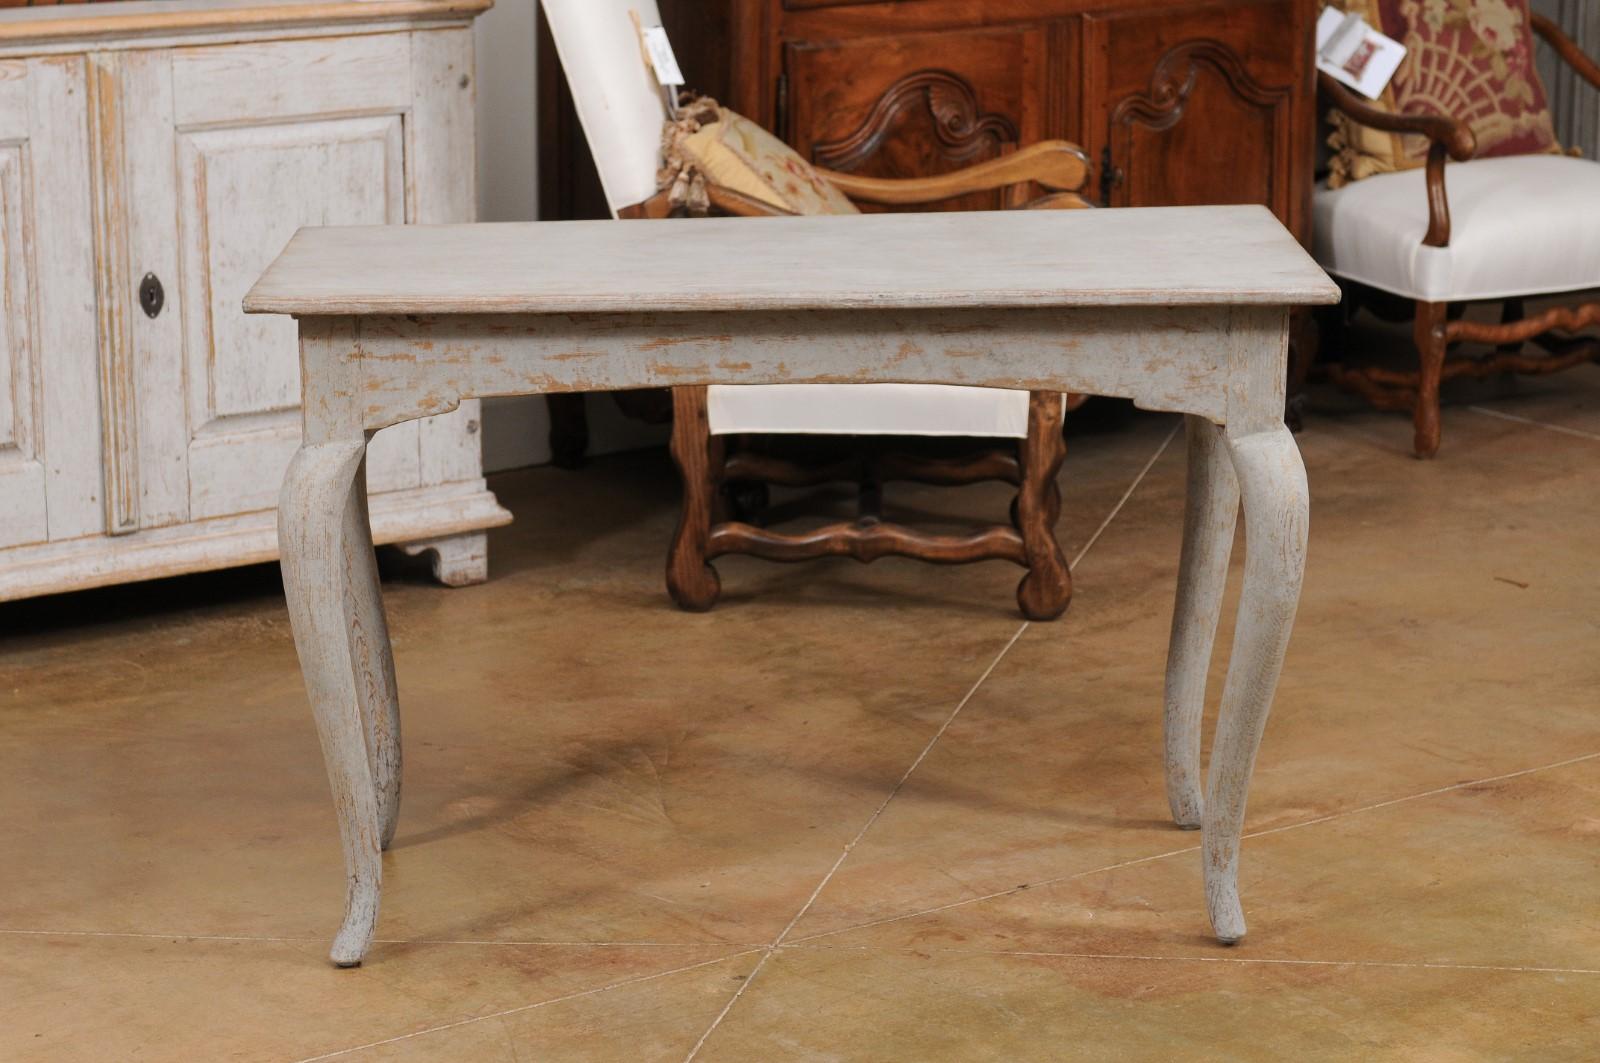 Swedish 1780s Rococo Period Table with Cabriole Legs and Distressed Finish 1